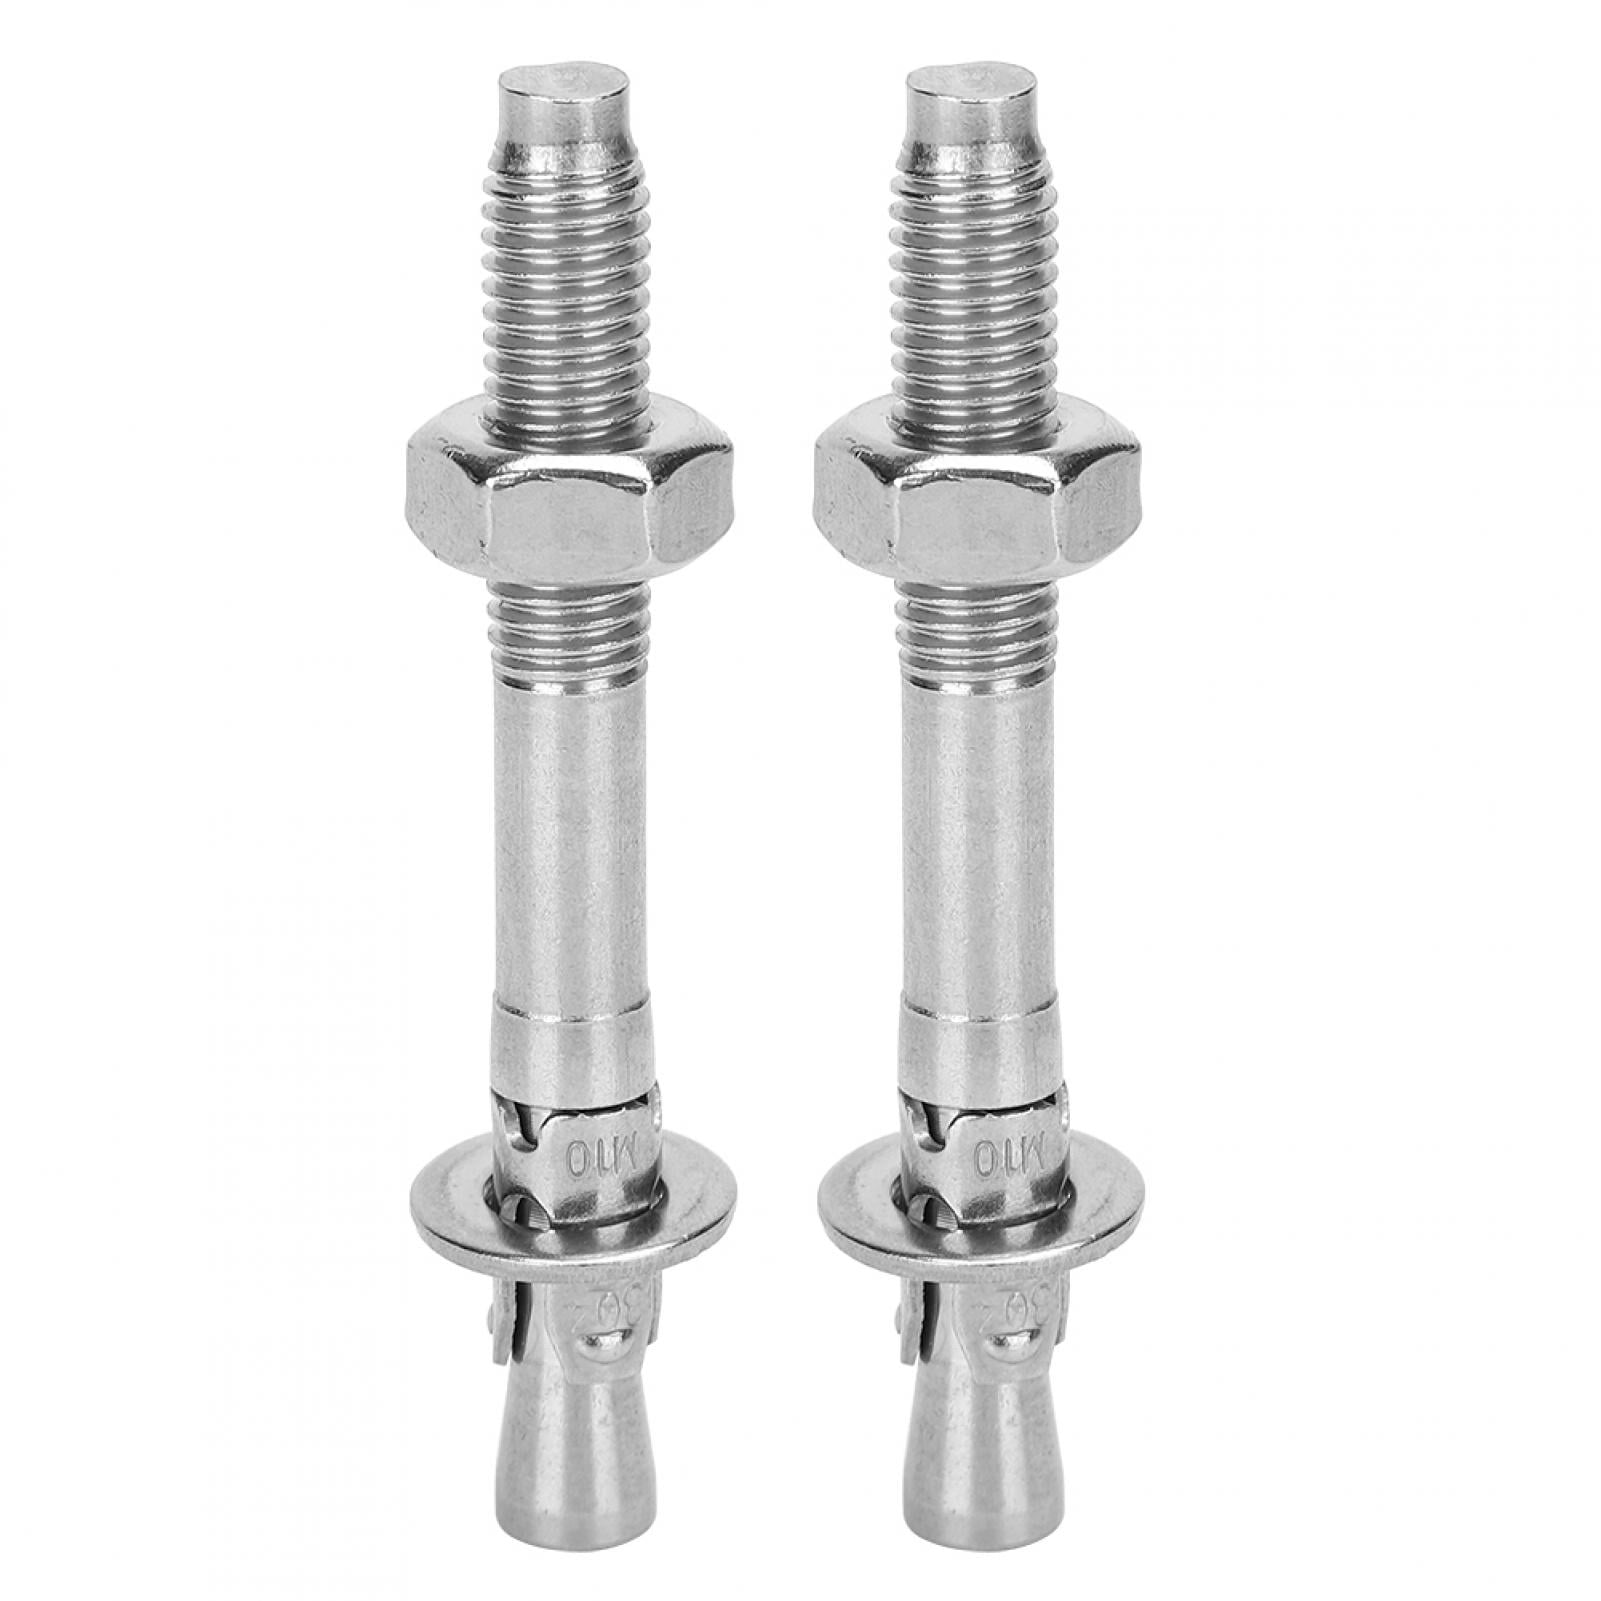 2Pcs Stainless Steel Rock Climbing Anchor Fixing Expansion Bolt Screw Piton 